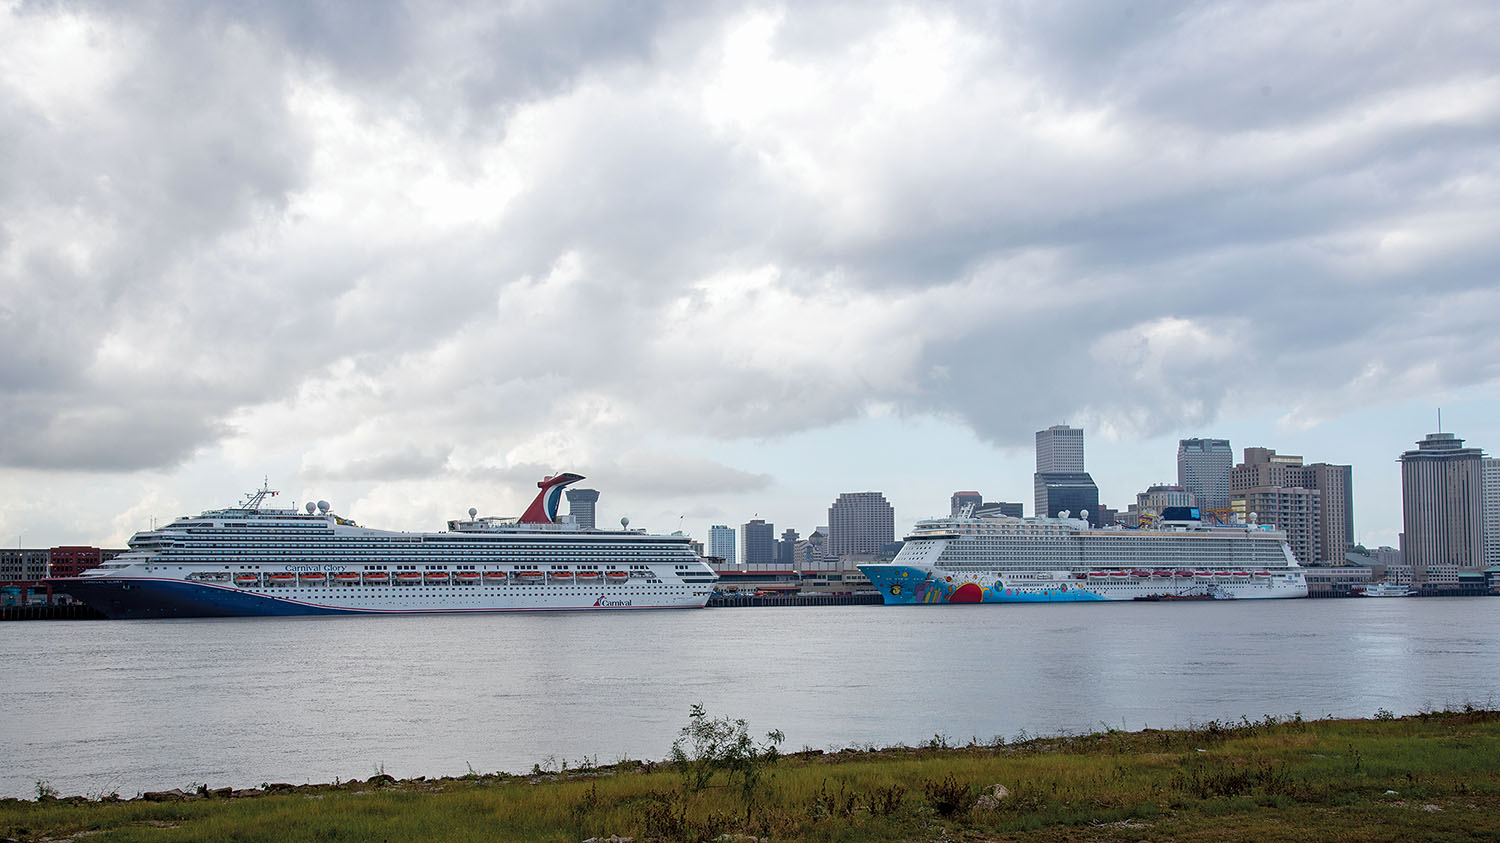 The Carnival Glory and the Norwegian Breakaway docked on November 21 before they set sail from Port NOLA. (Photo courtesy of Port NOLA)